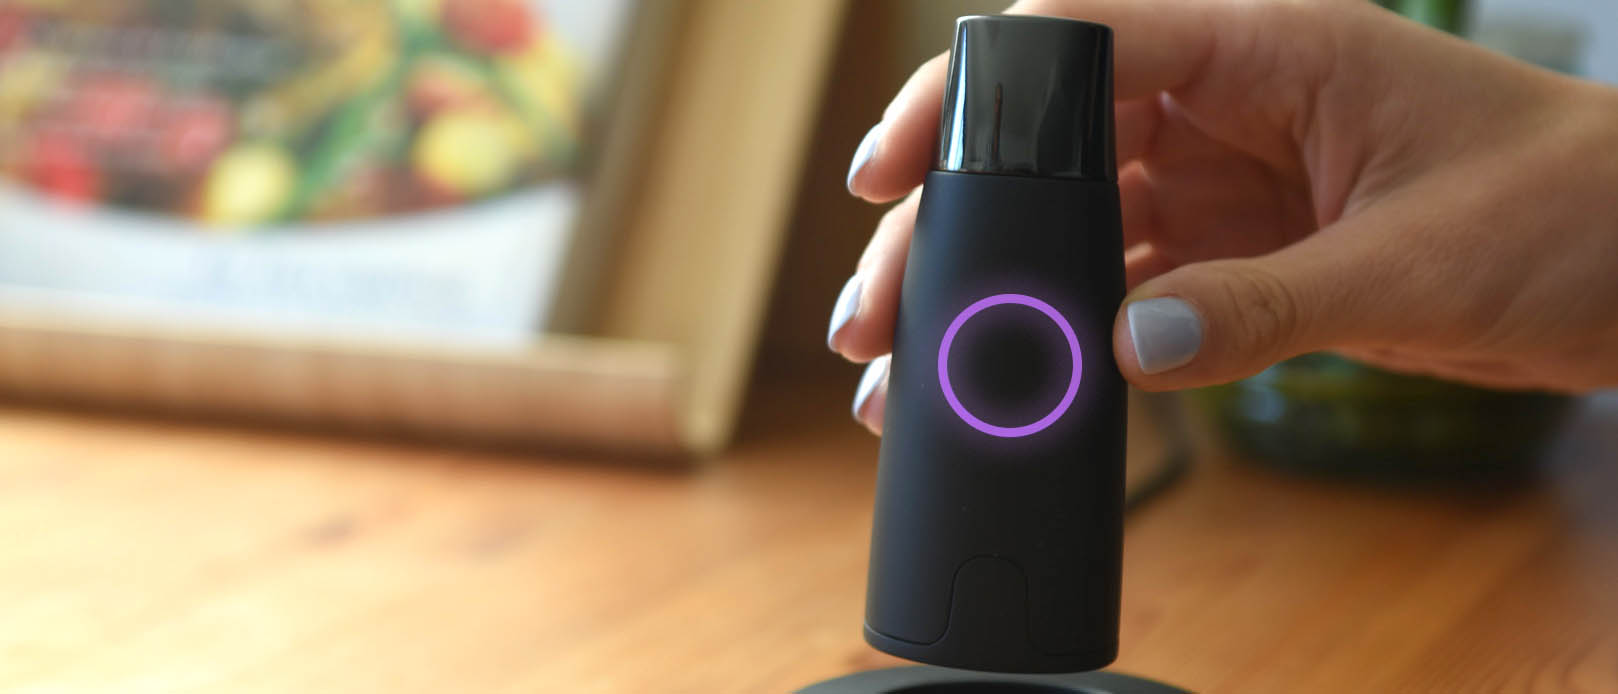 Lumen review: Everything you need to know about this trendy